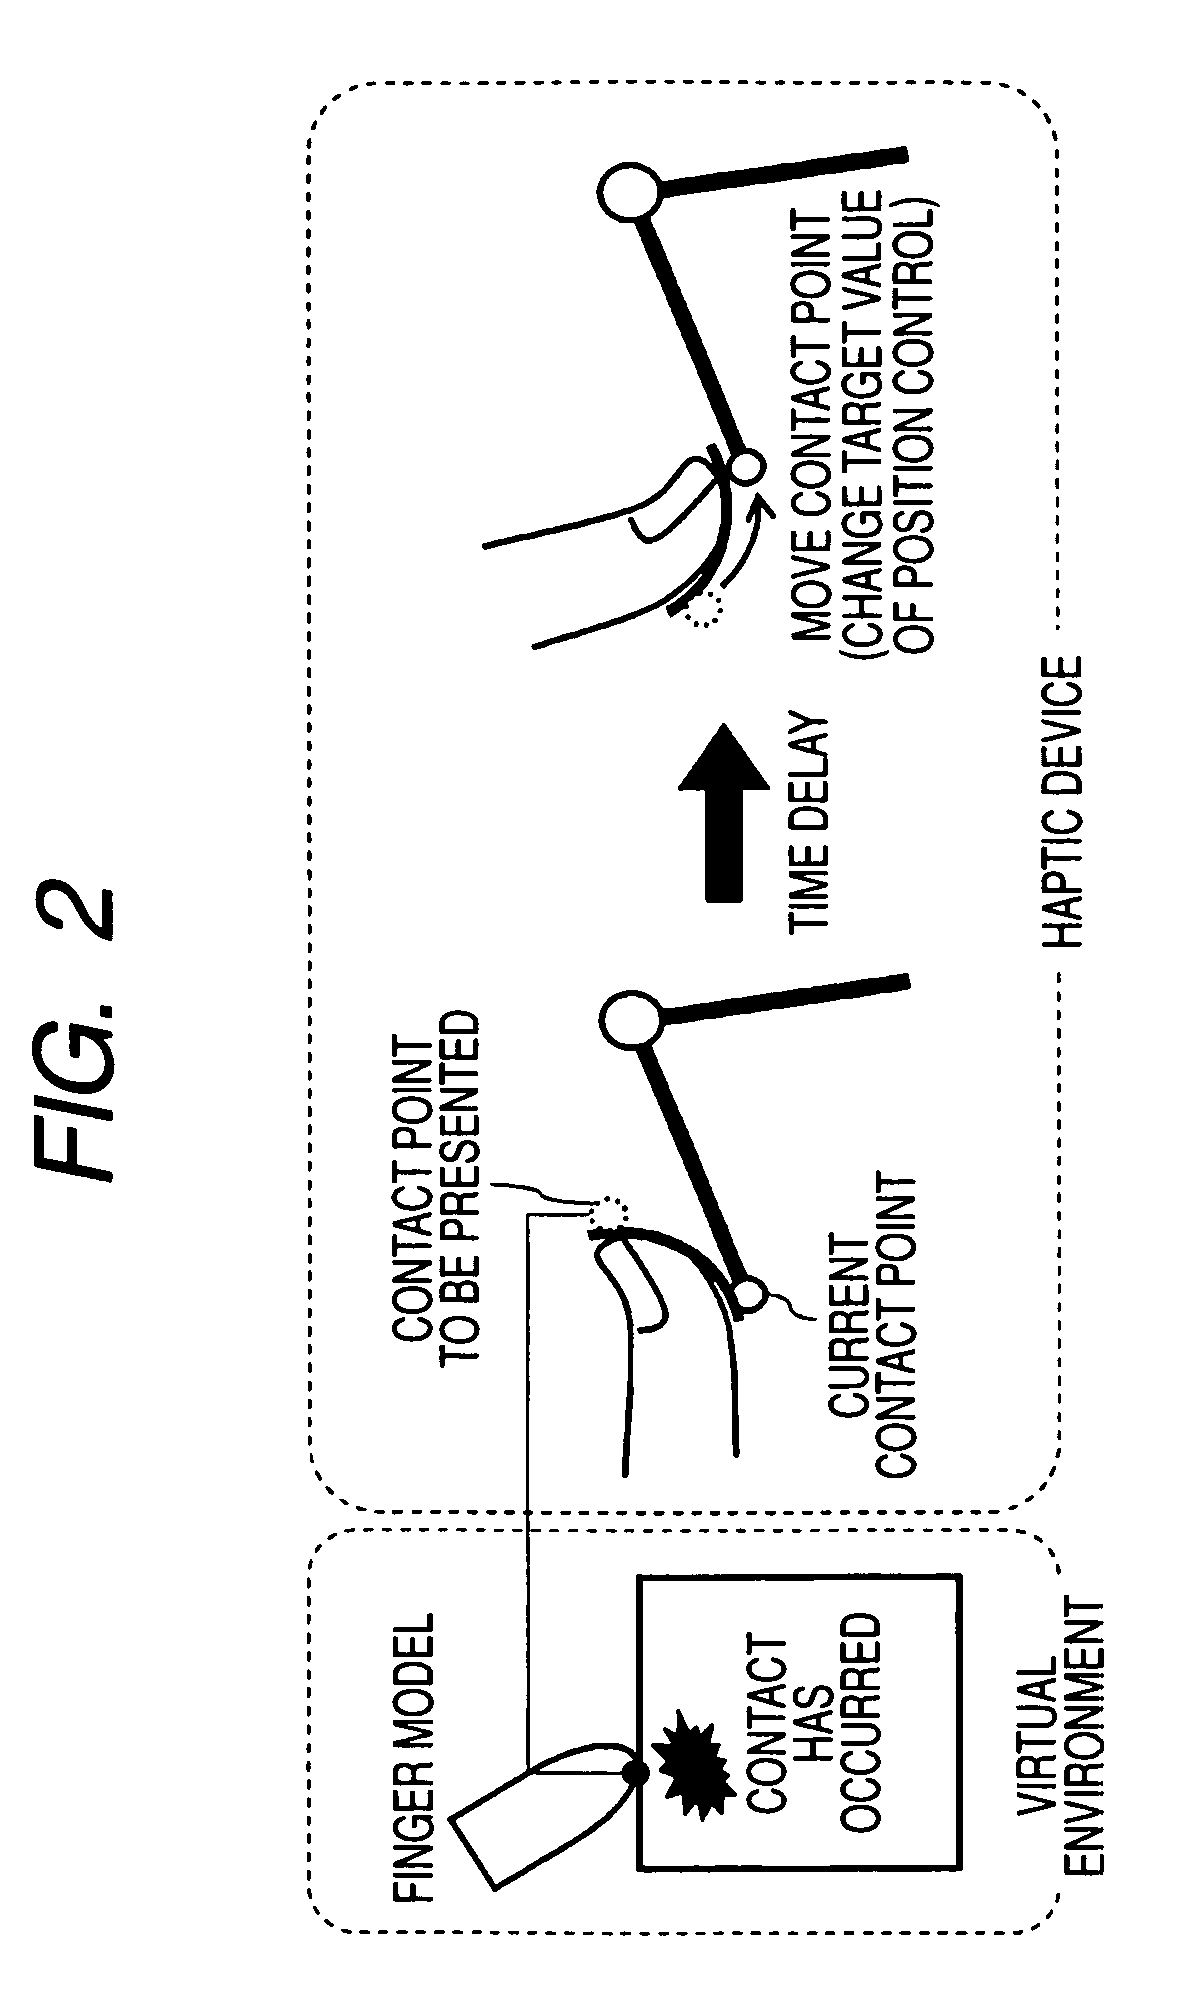 Force/tactile display, method for controlling force/tactile display, and computer program